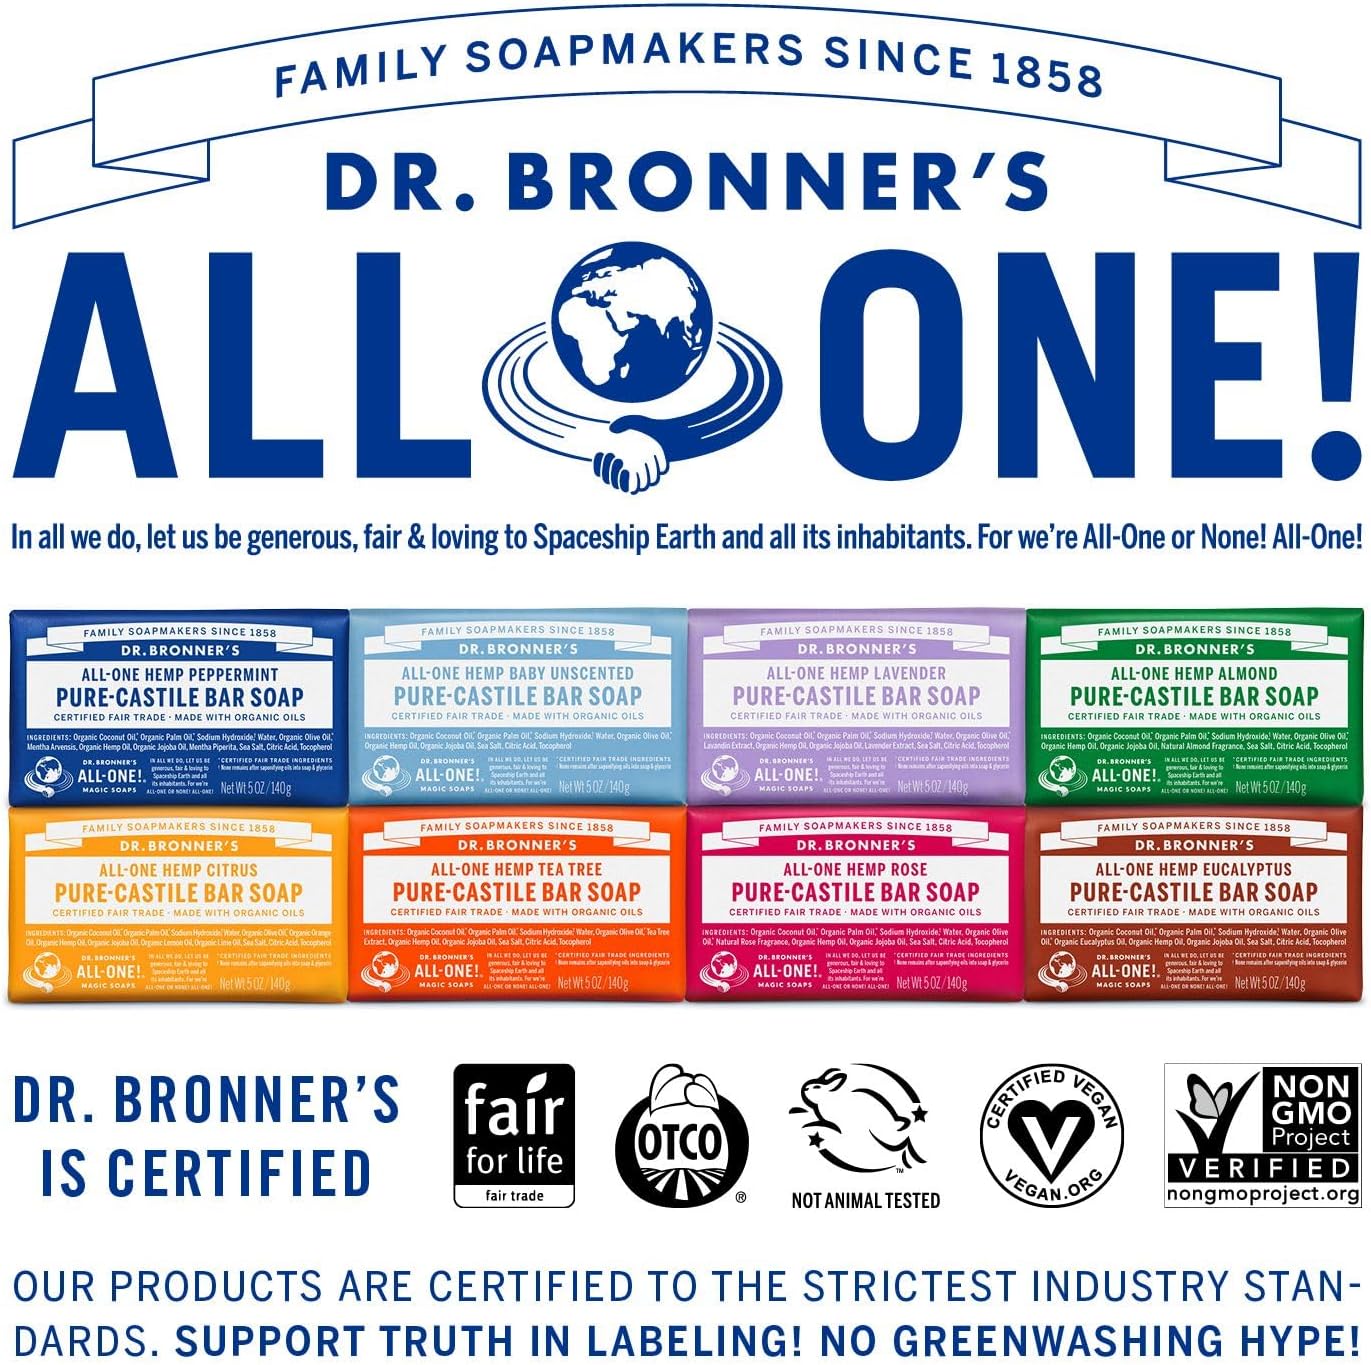 Dr. Bronner's - Pure-Castile Bar Soap (Rose, 5 ounce) - Made with Organic Oils, For Face, Body and Hair, Gentle and Moisturizing, Biodegradable, Vegan, Cruelty-free, Non-GMO : Baby Bar Soaps : Beauty & Personal Care